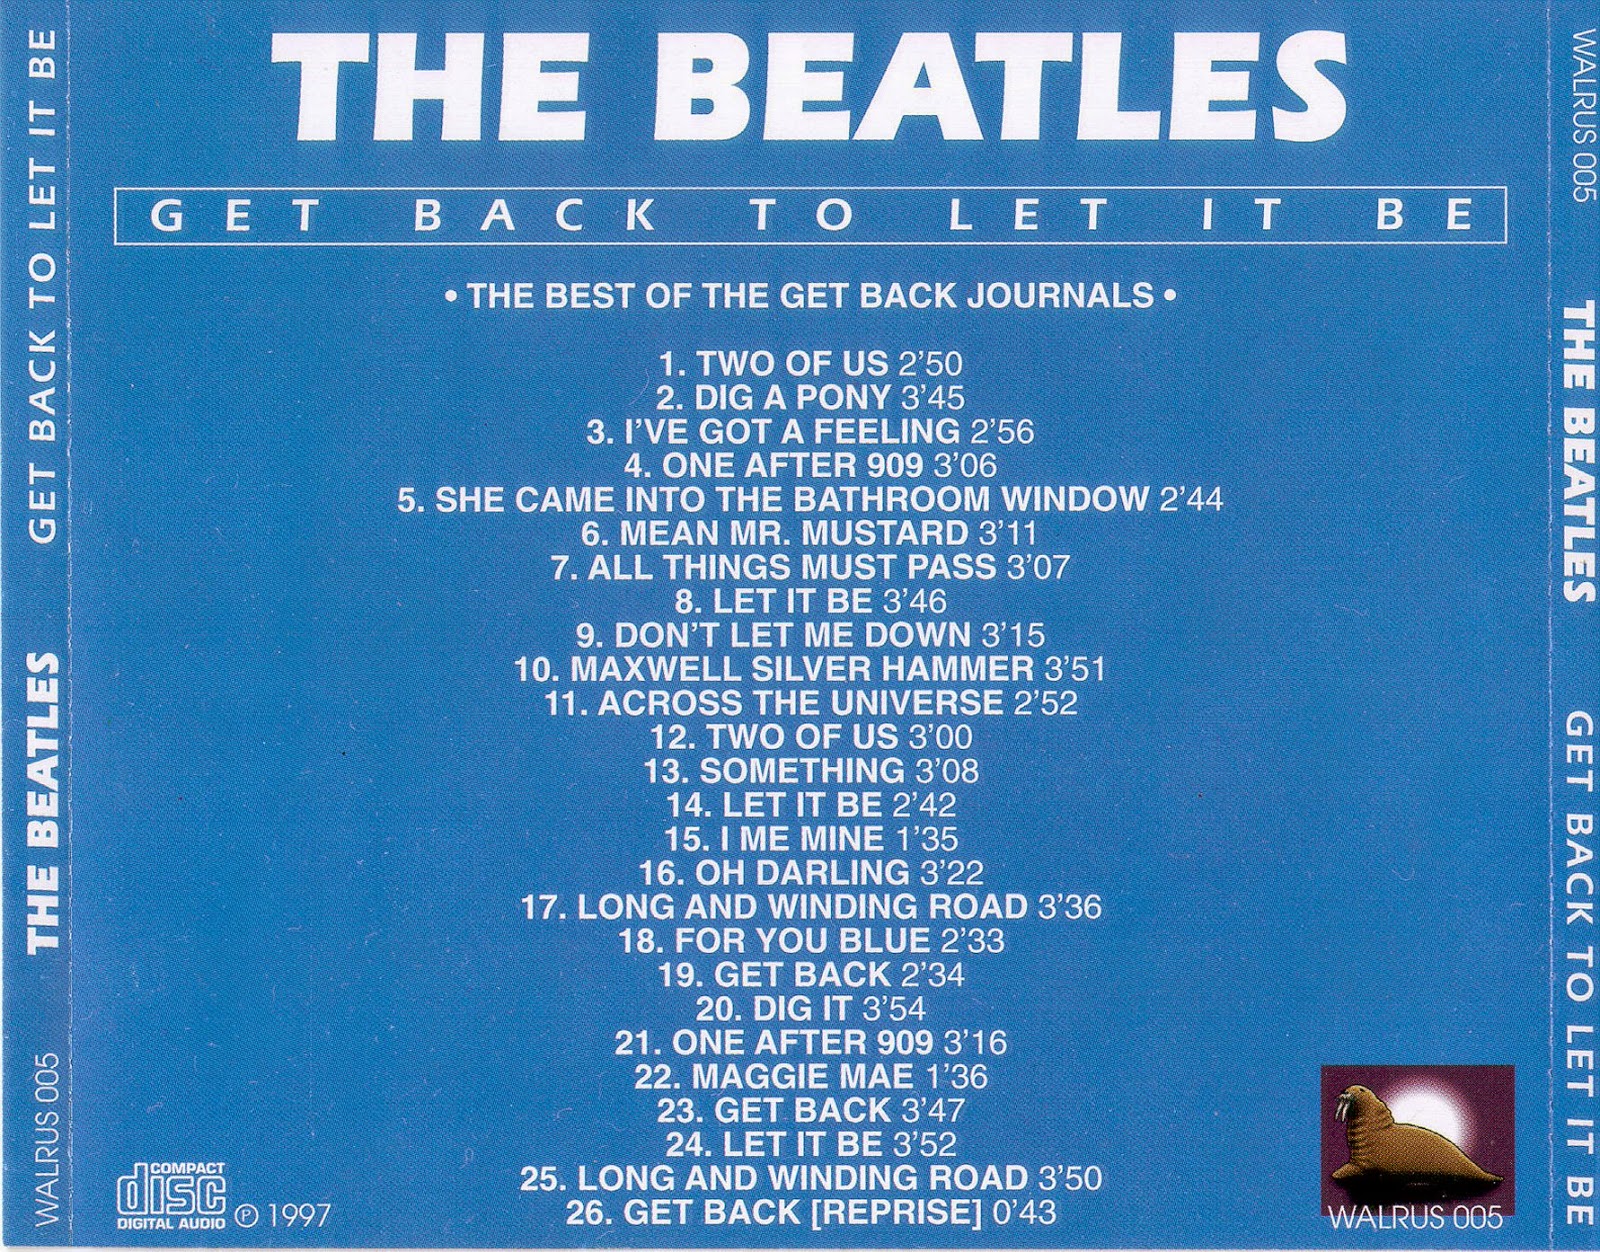 Let get backing. Битлз Let it be. Let it be the Beatles текст. Битлз Let it be текст. Let it be (Beatles album).